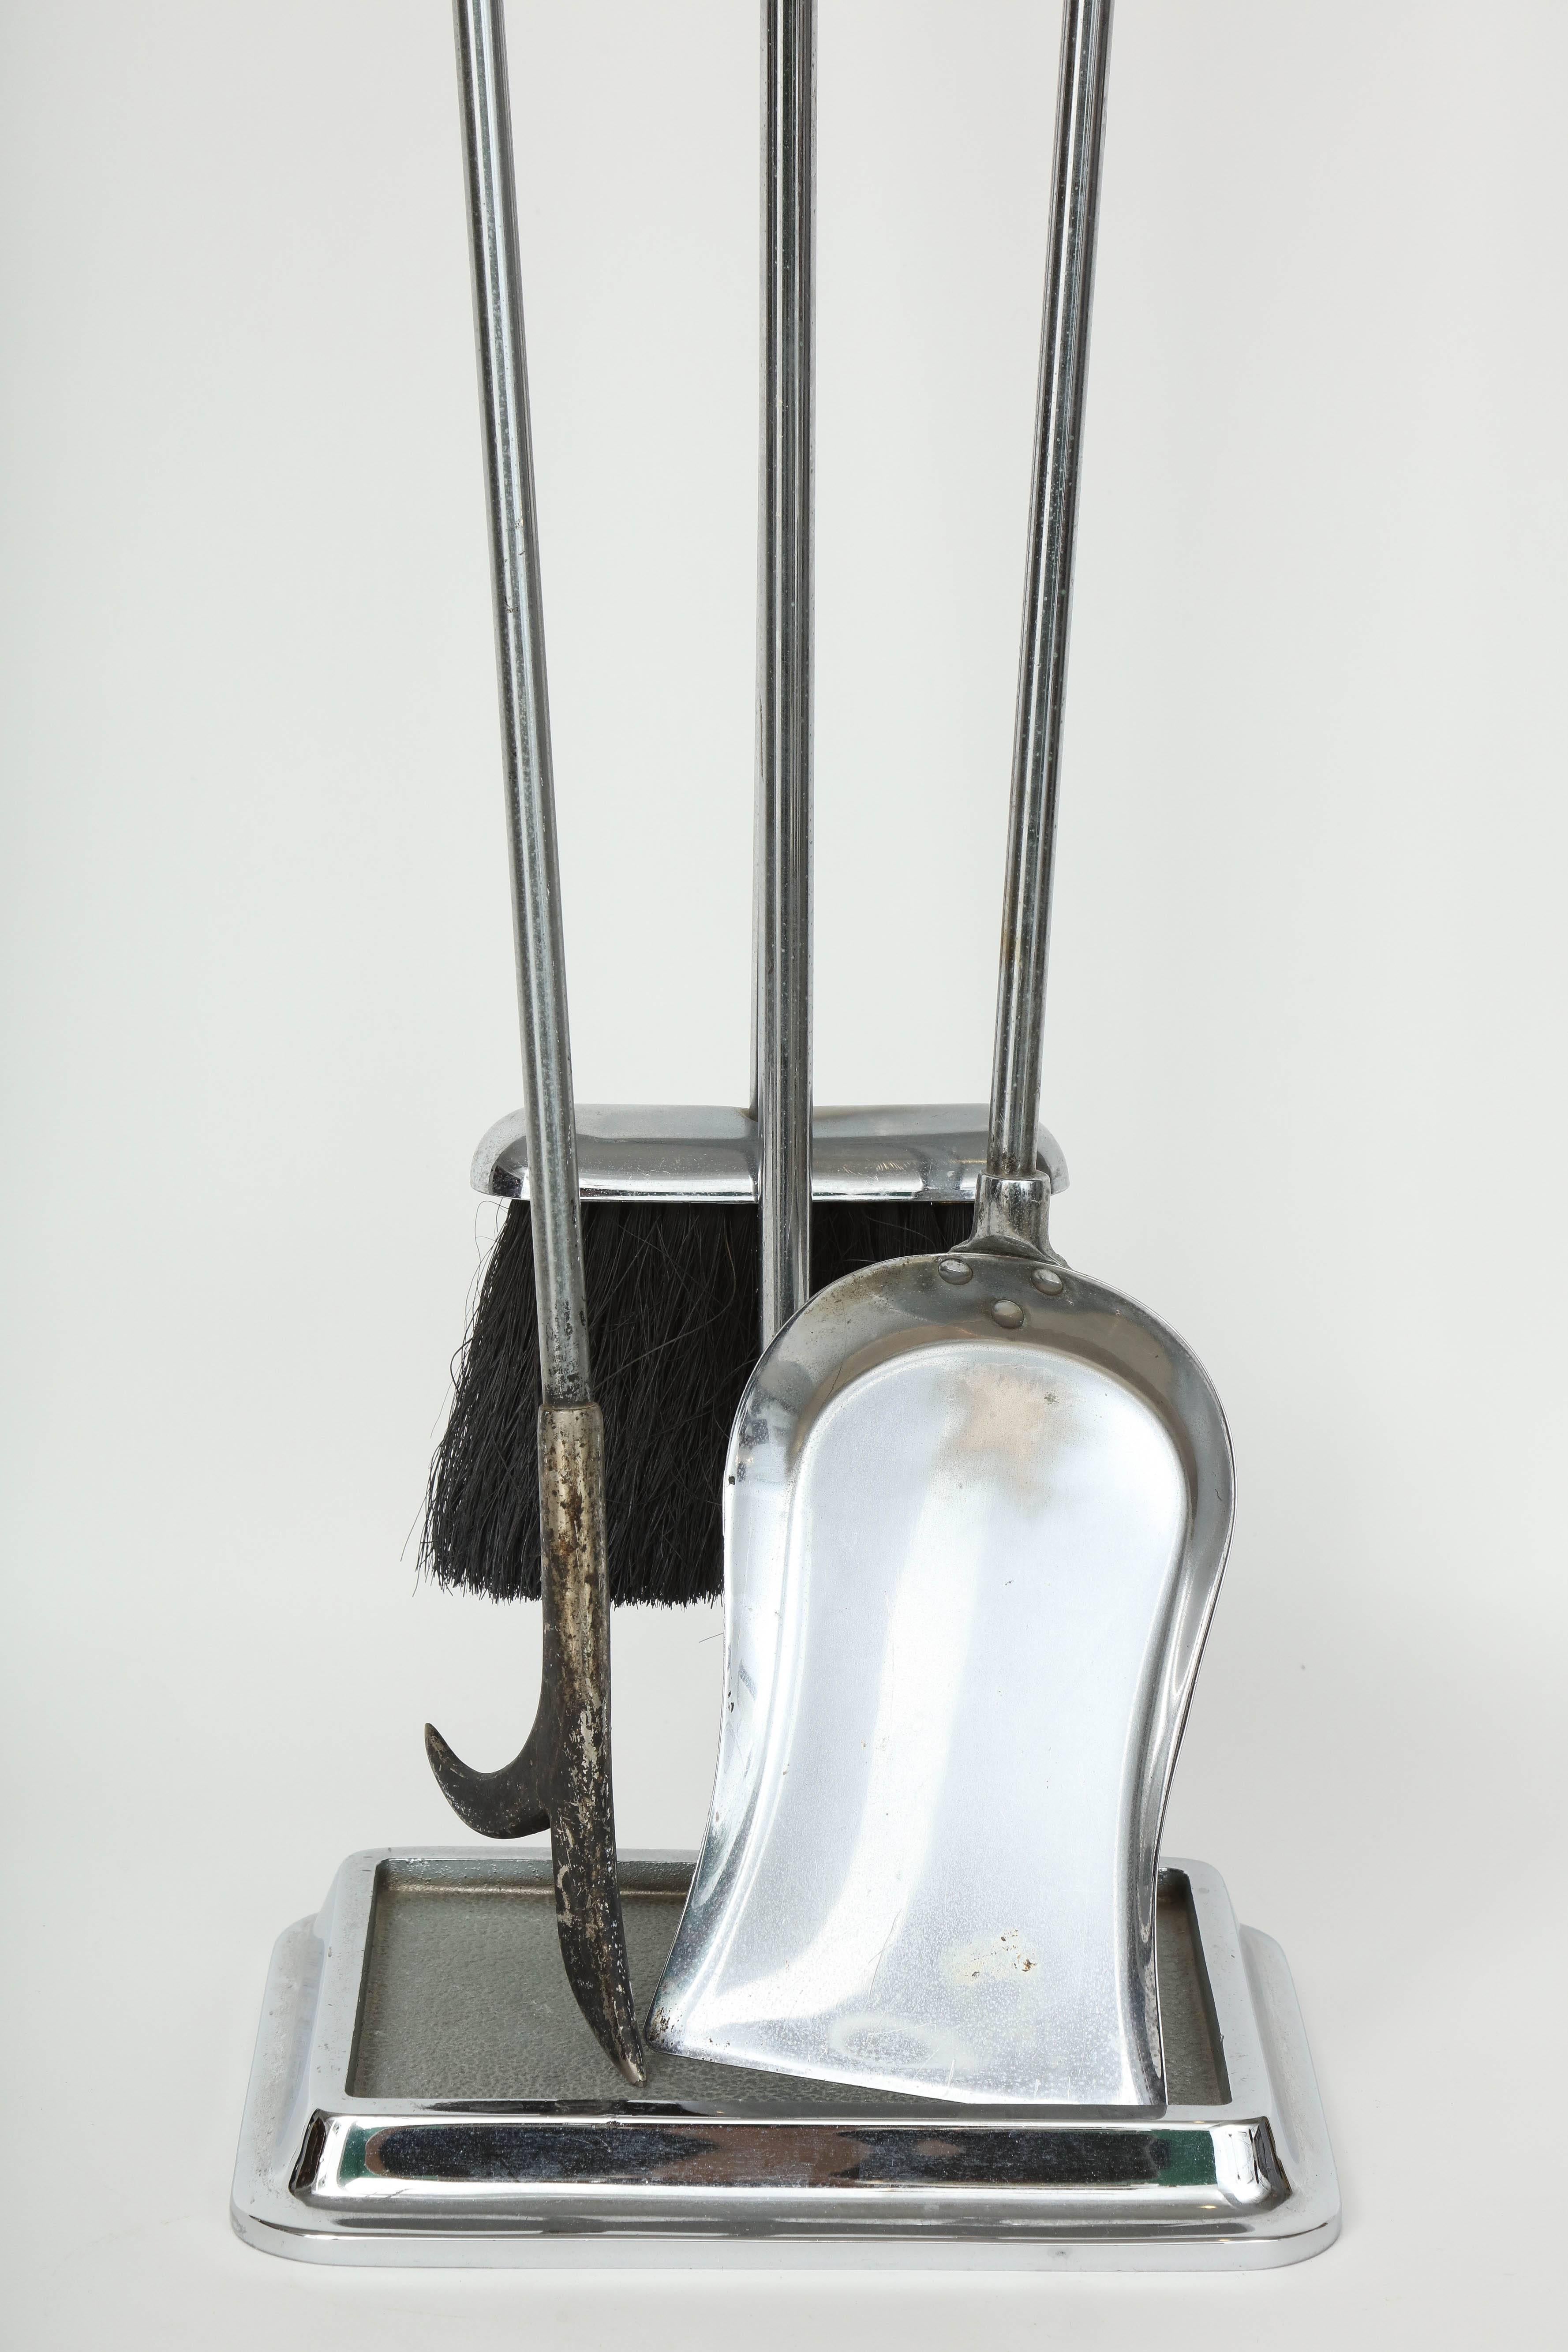 Mid-Century Classic set of nickel fireplace tools consisting of stand, poker, shovel and broom. Handles are solid nickel with a knob finial.